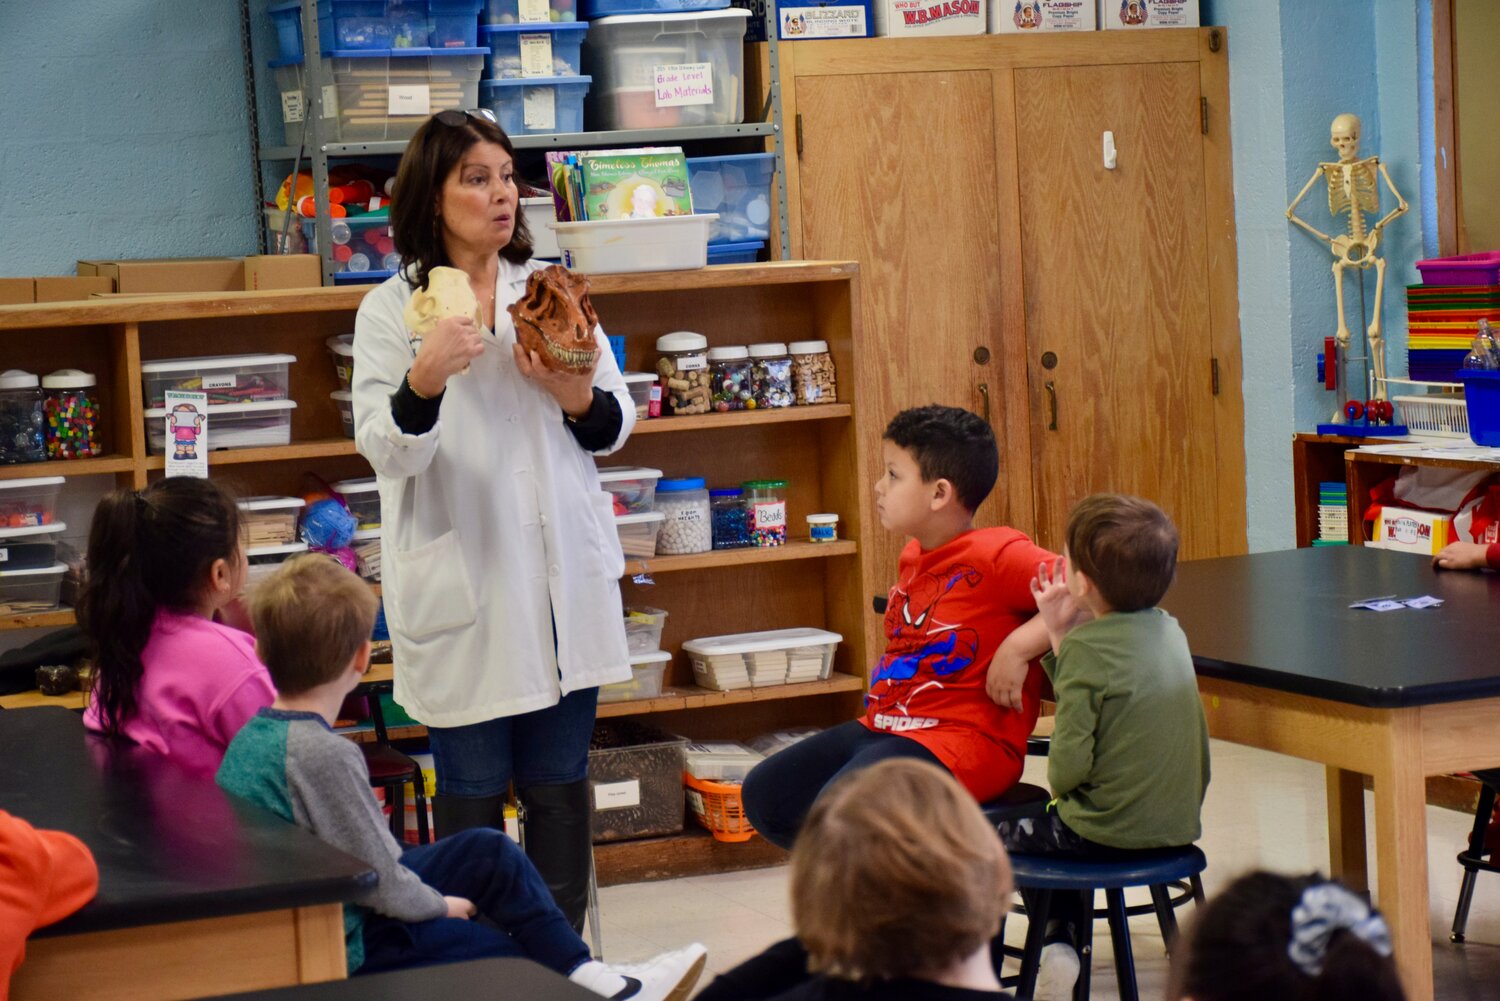 A representative from the Long Island Science Center teaches Franklin Square students about dinosaurs using replicas and fossils of dinosaur eggs, teeth and a skull.